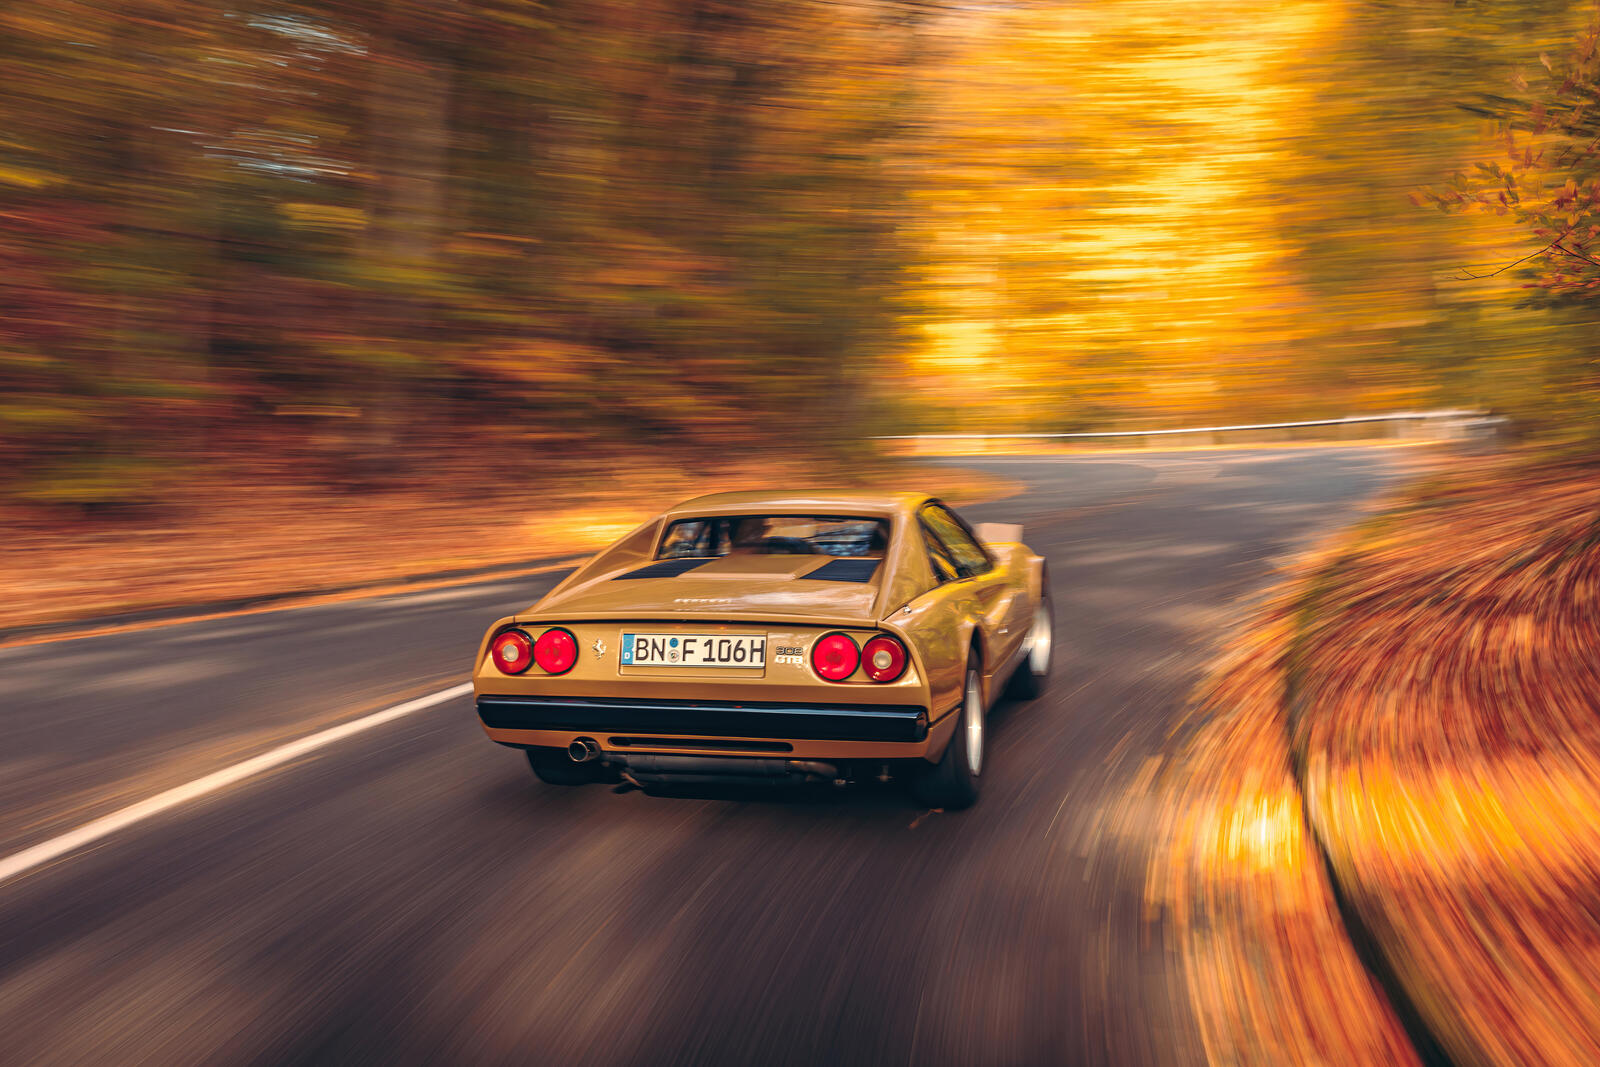 Free photo Ferrari 308 gtb on a country road in the fall